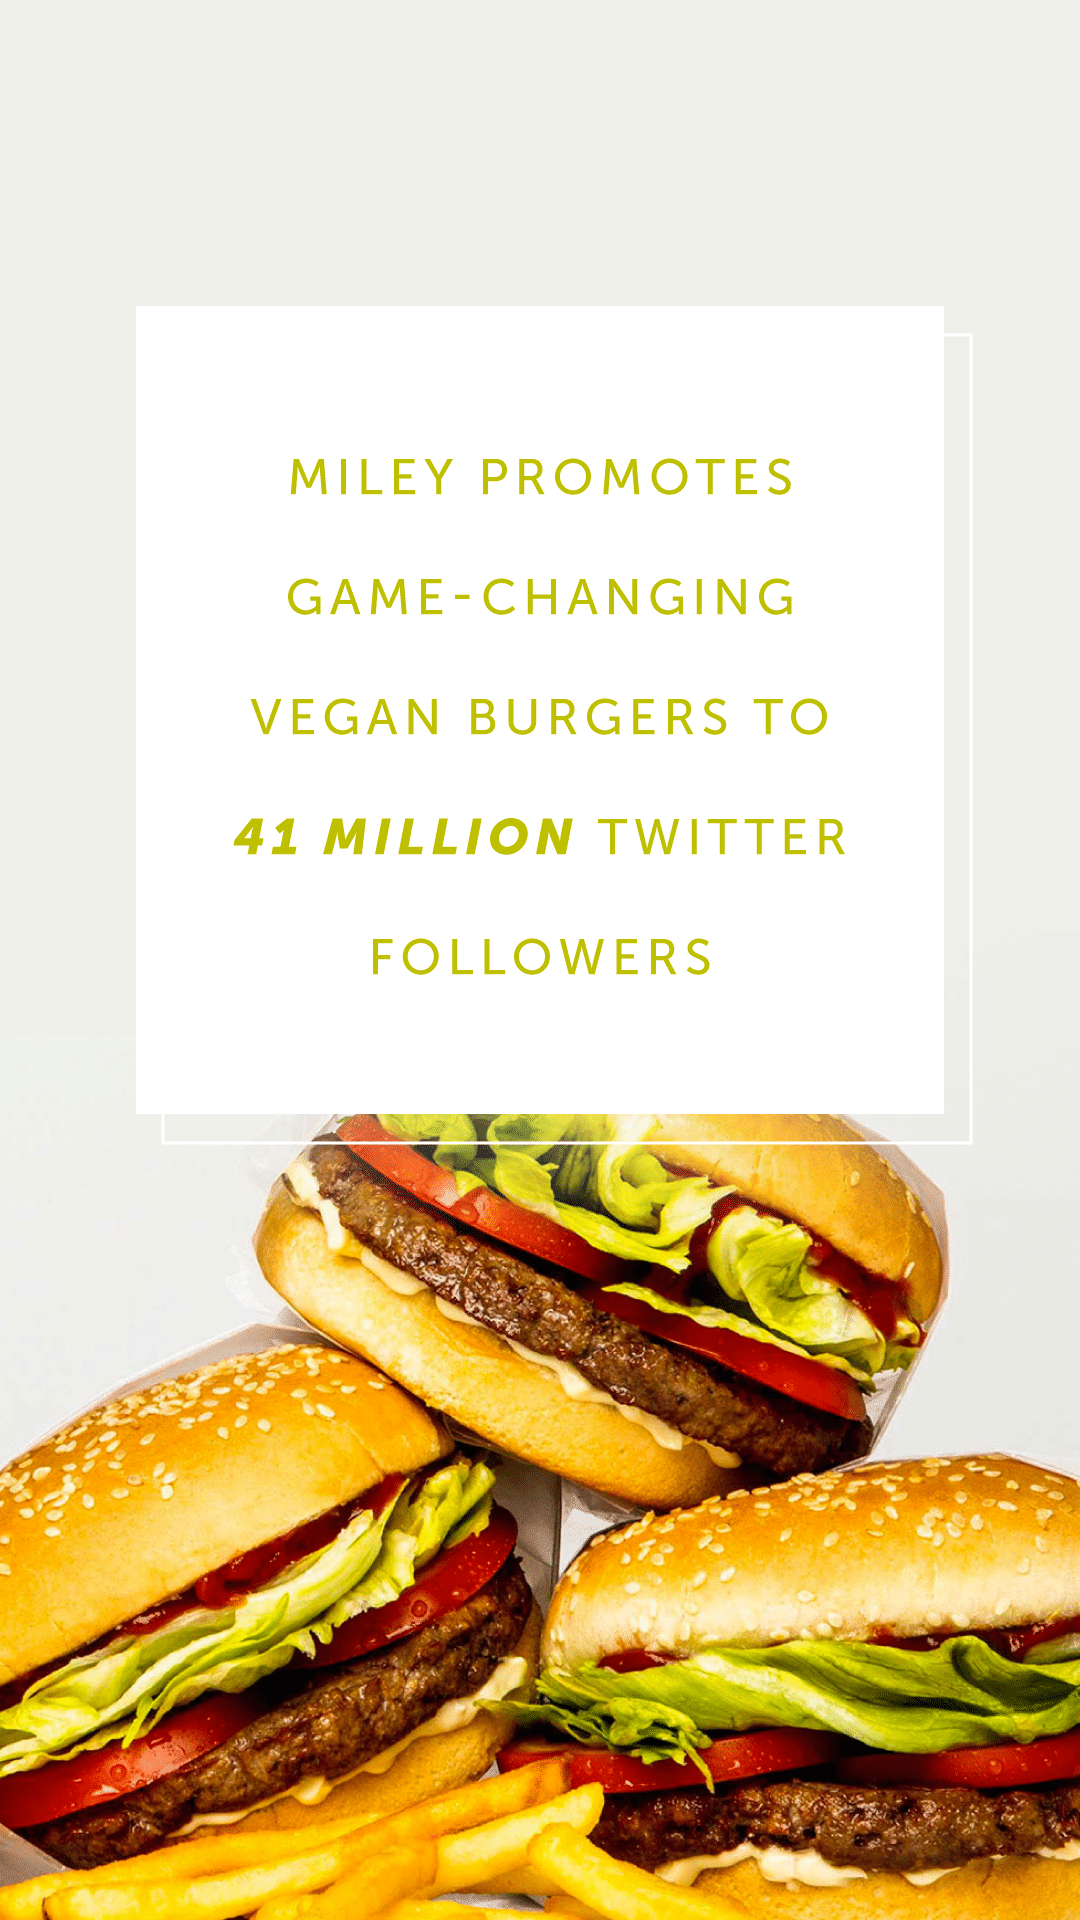 Miley Promotes Game-Changing Vegan Burgers to 41 Million Twitter Followers